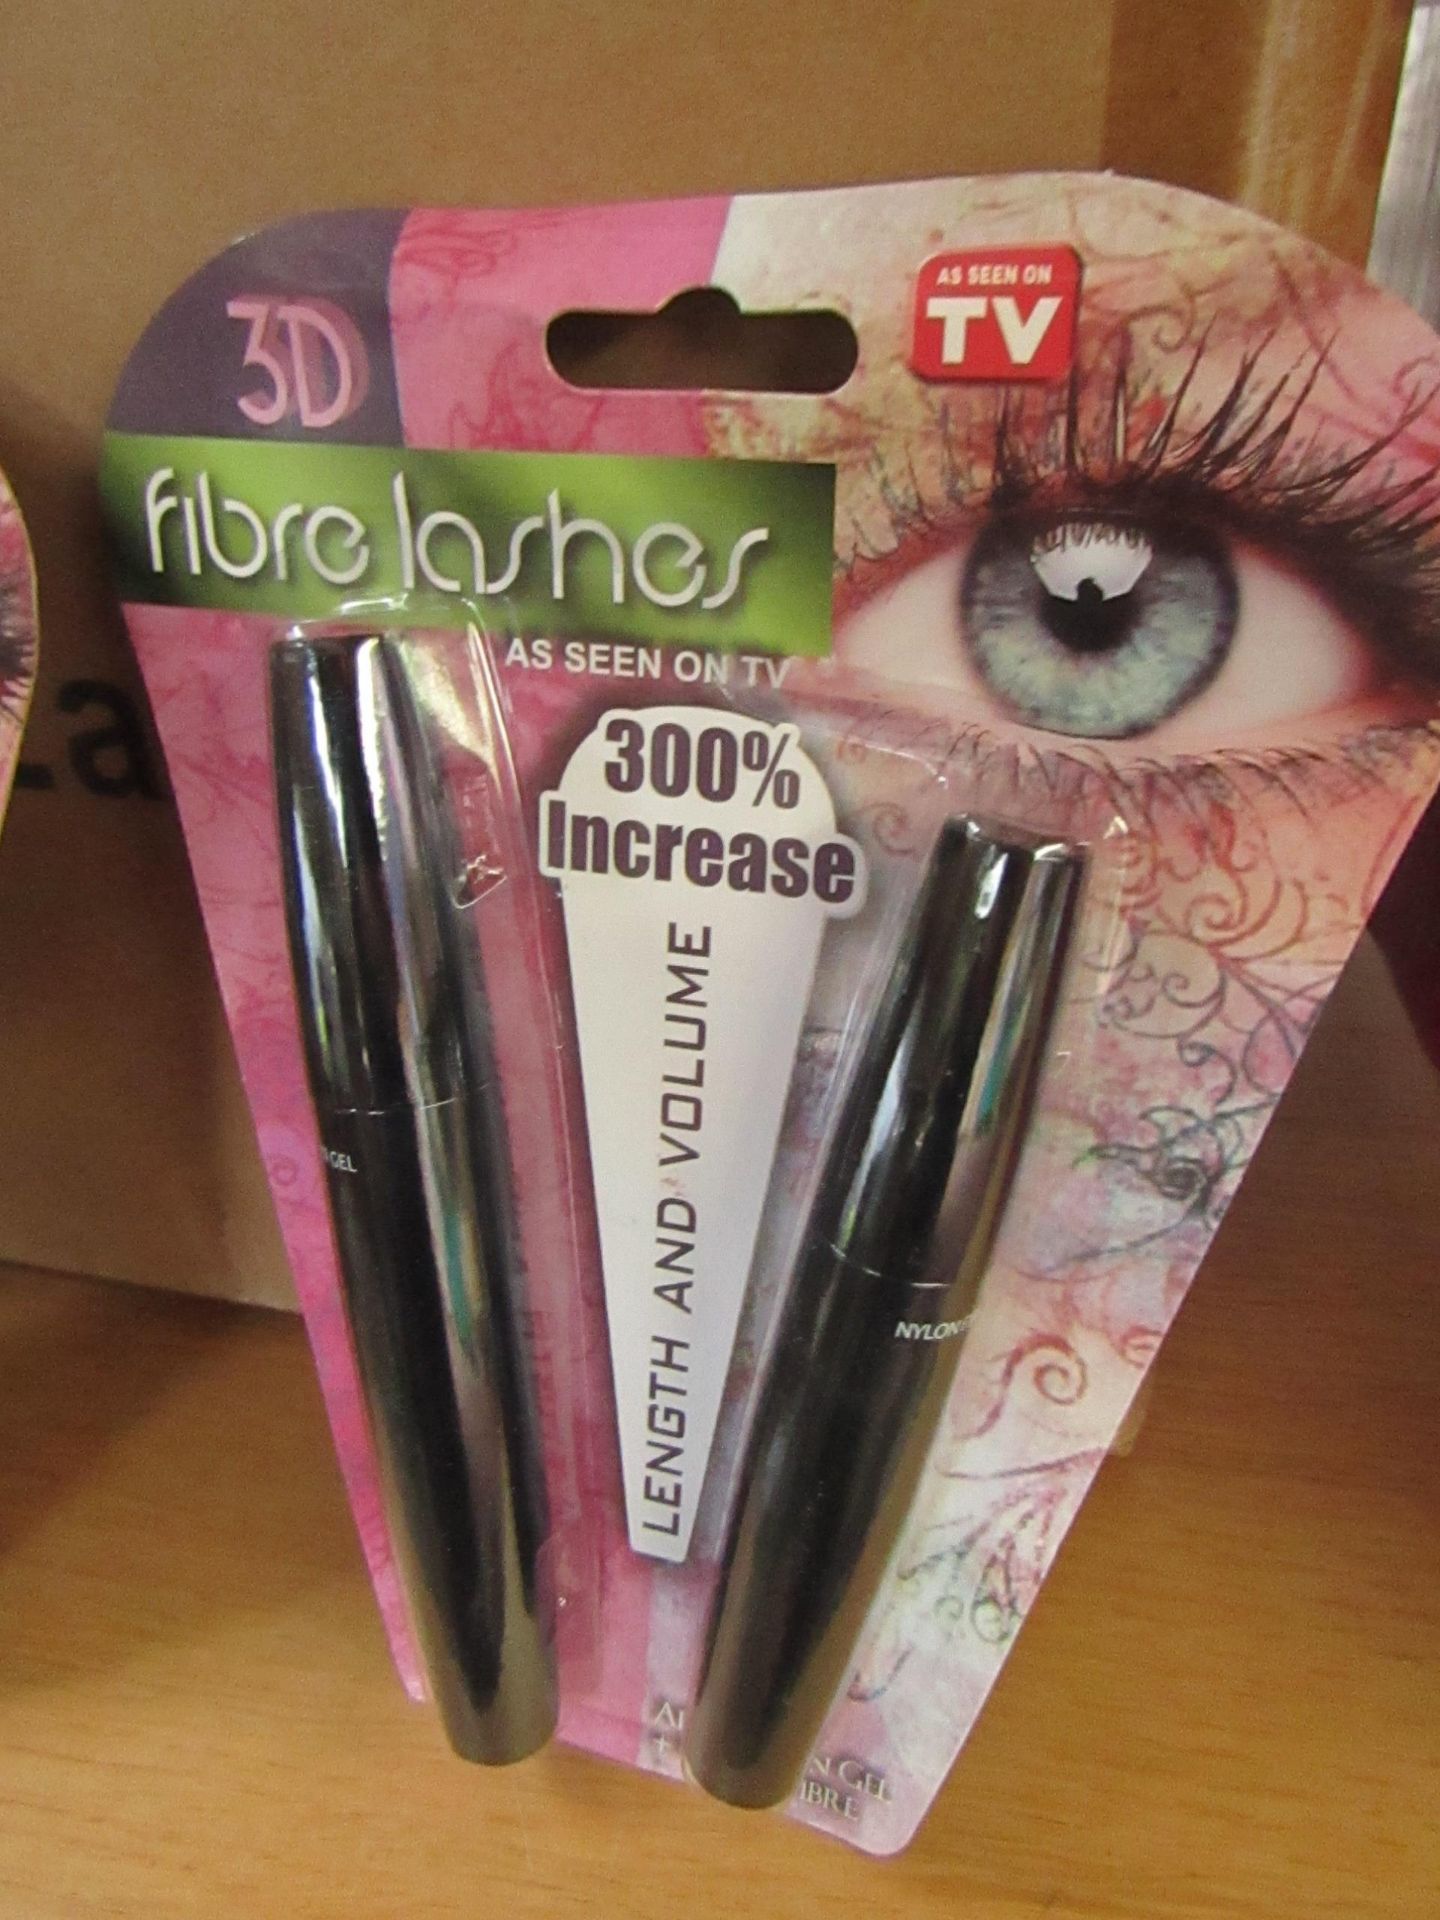 10 x 3D Fibre Lashes Mascara (as seen on TV)  RRP £8.99 each new and packaged